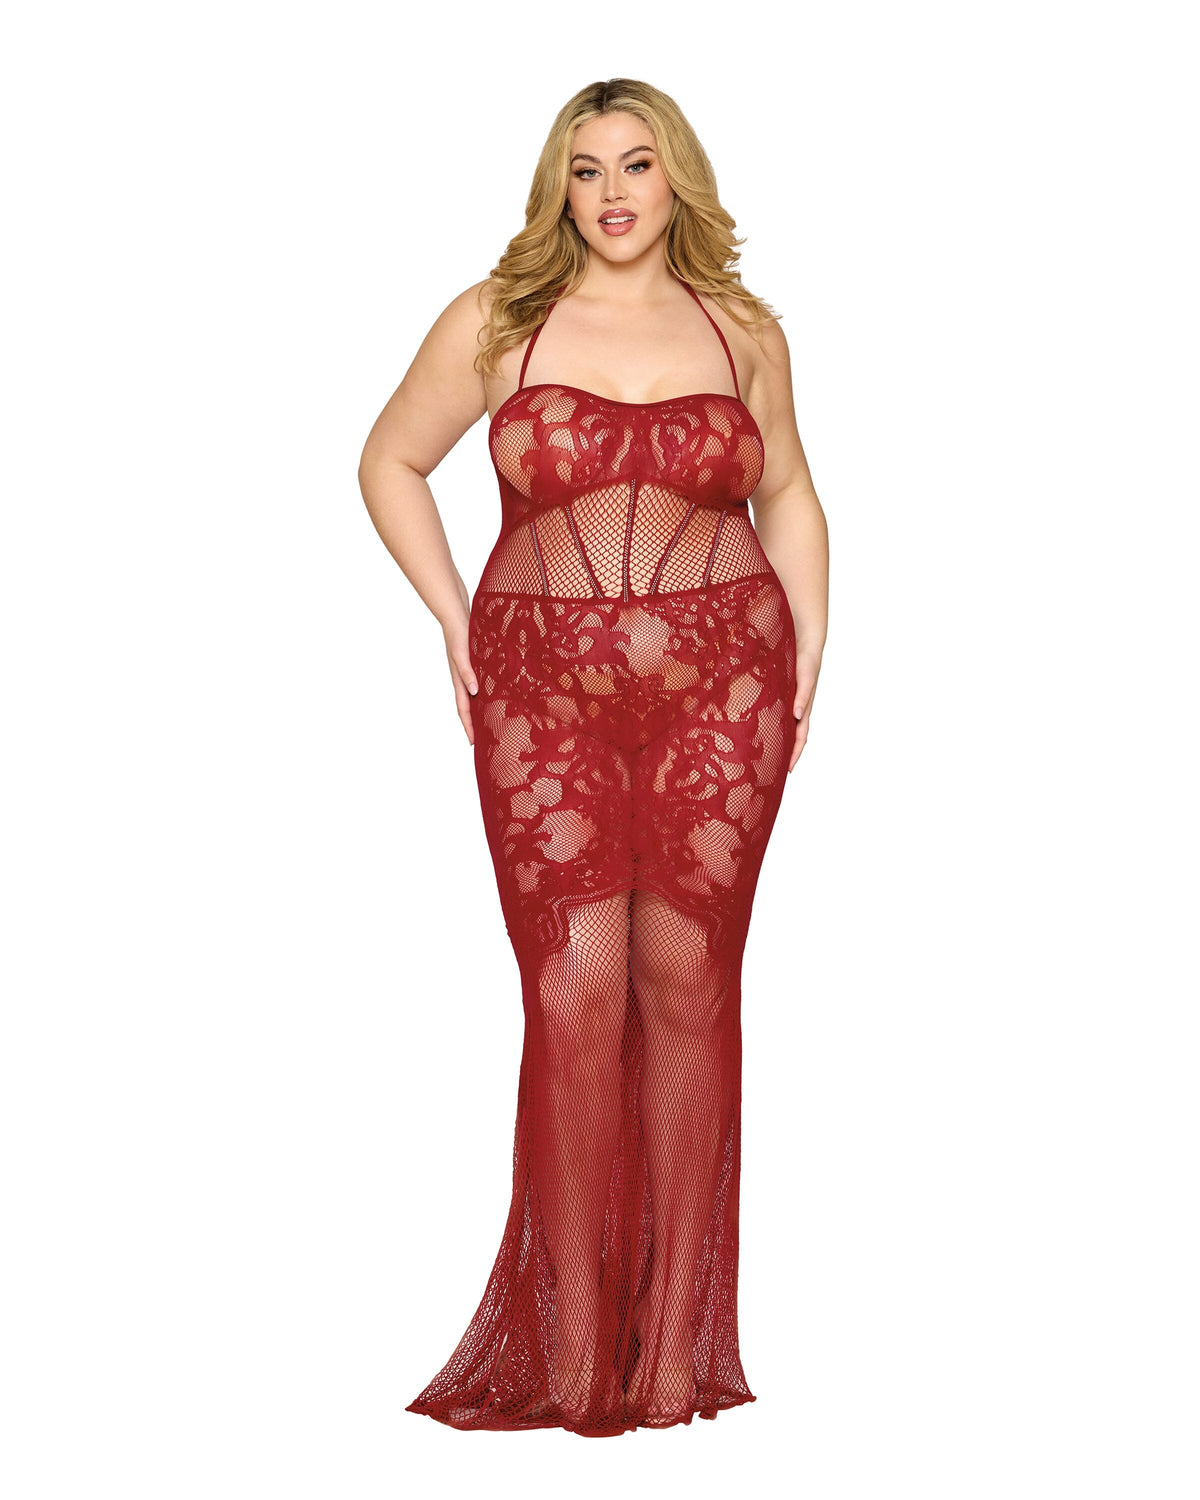 Dreamgirl Plus Size Bodystocking Lace Gown Bodystocking Dreamgirl 